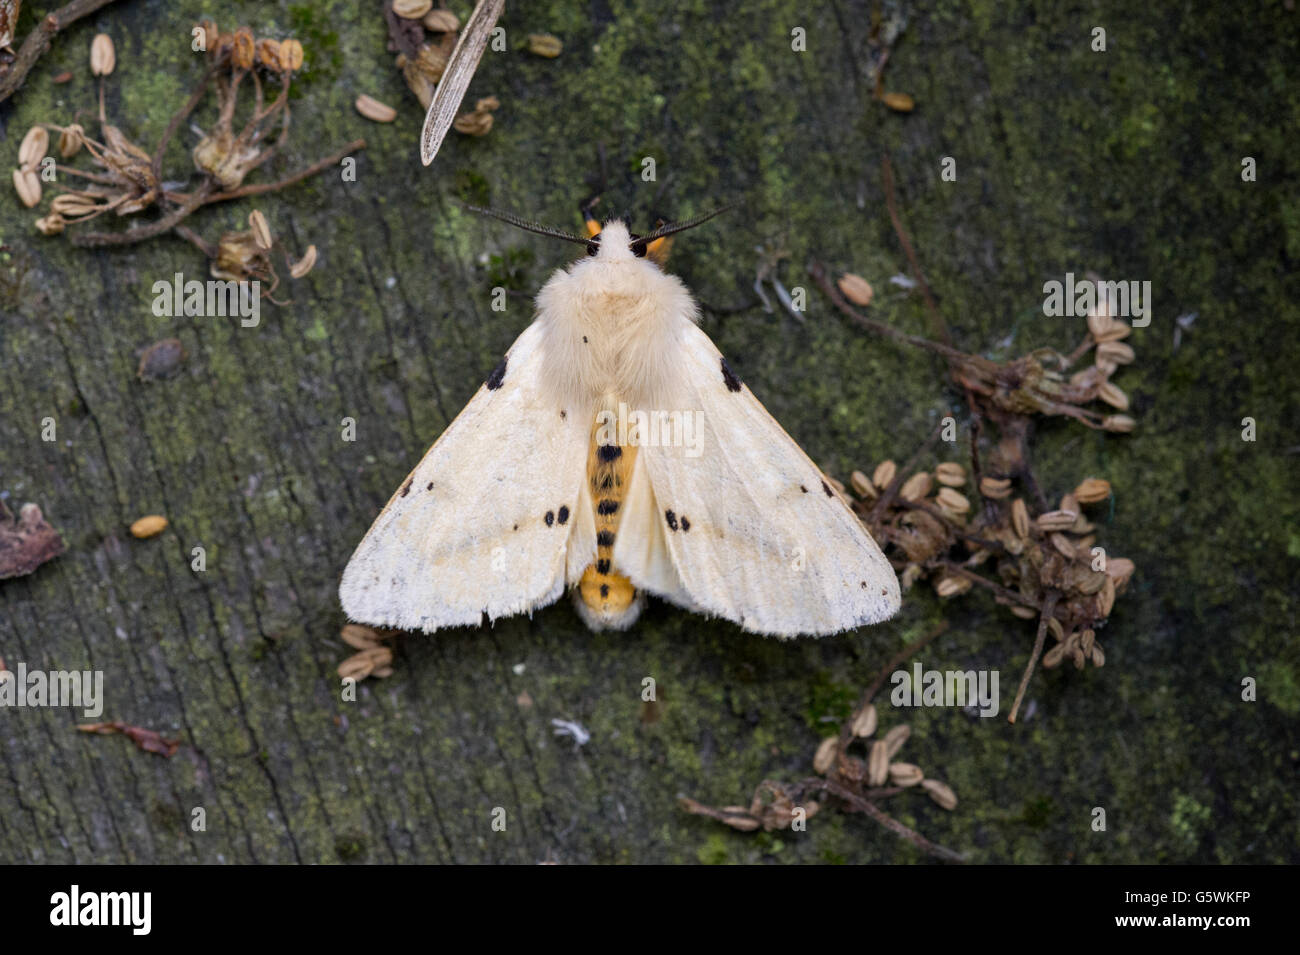 A White Ermine (Spilosoma lubricipeda) resting on an old garden table in East Yorkshire Stock Photo